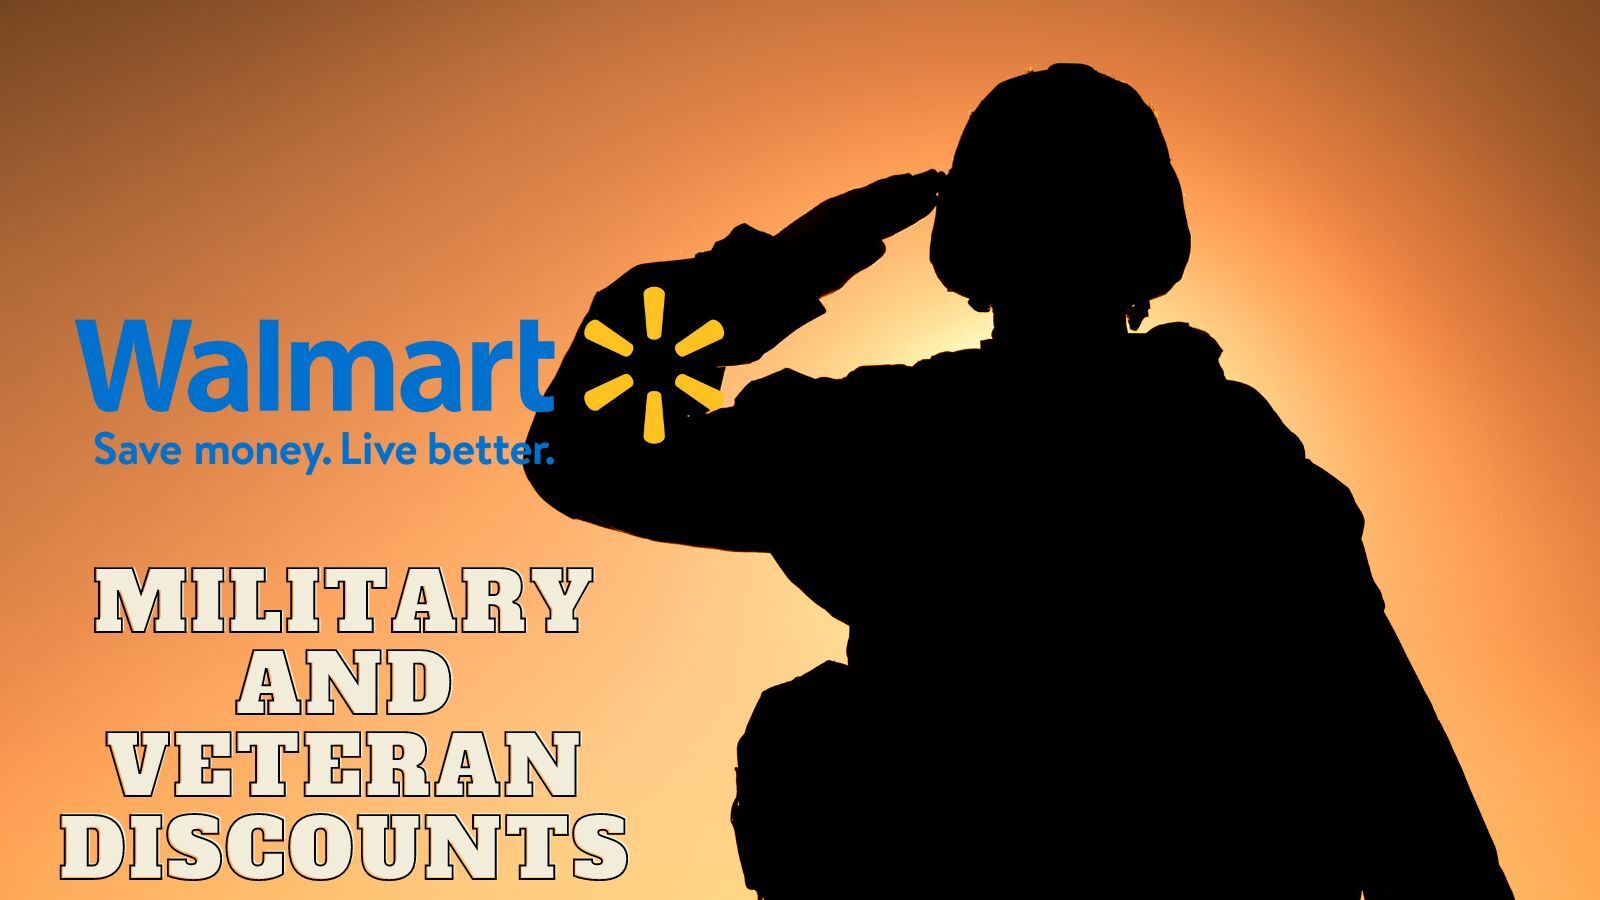 Does Walmart Offer Military and Veteran Discounts?